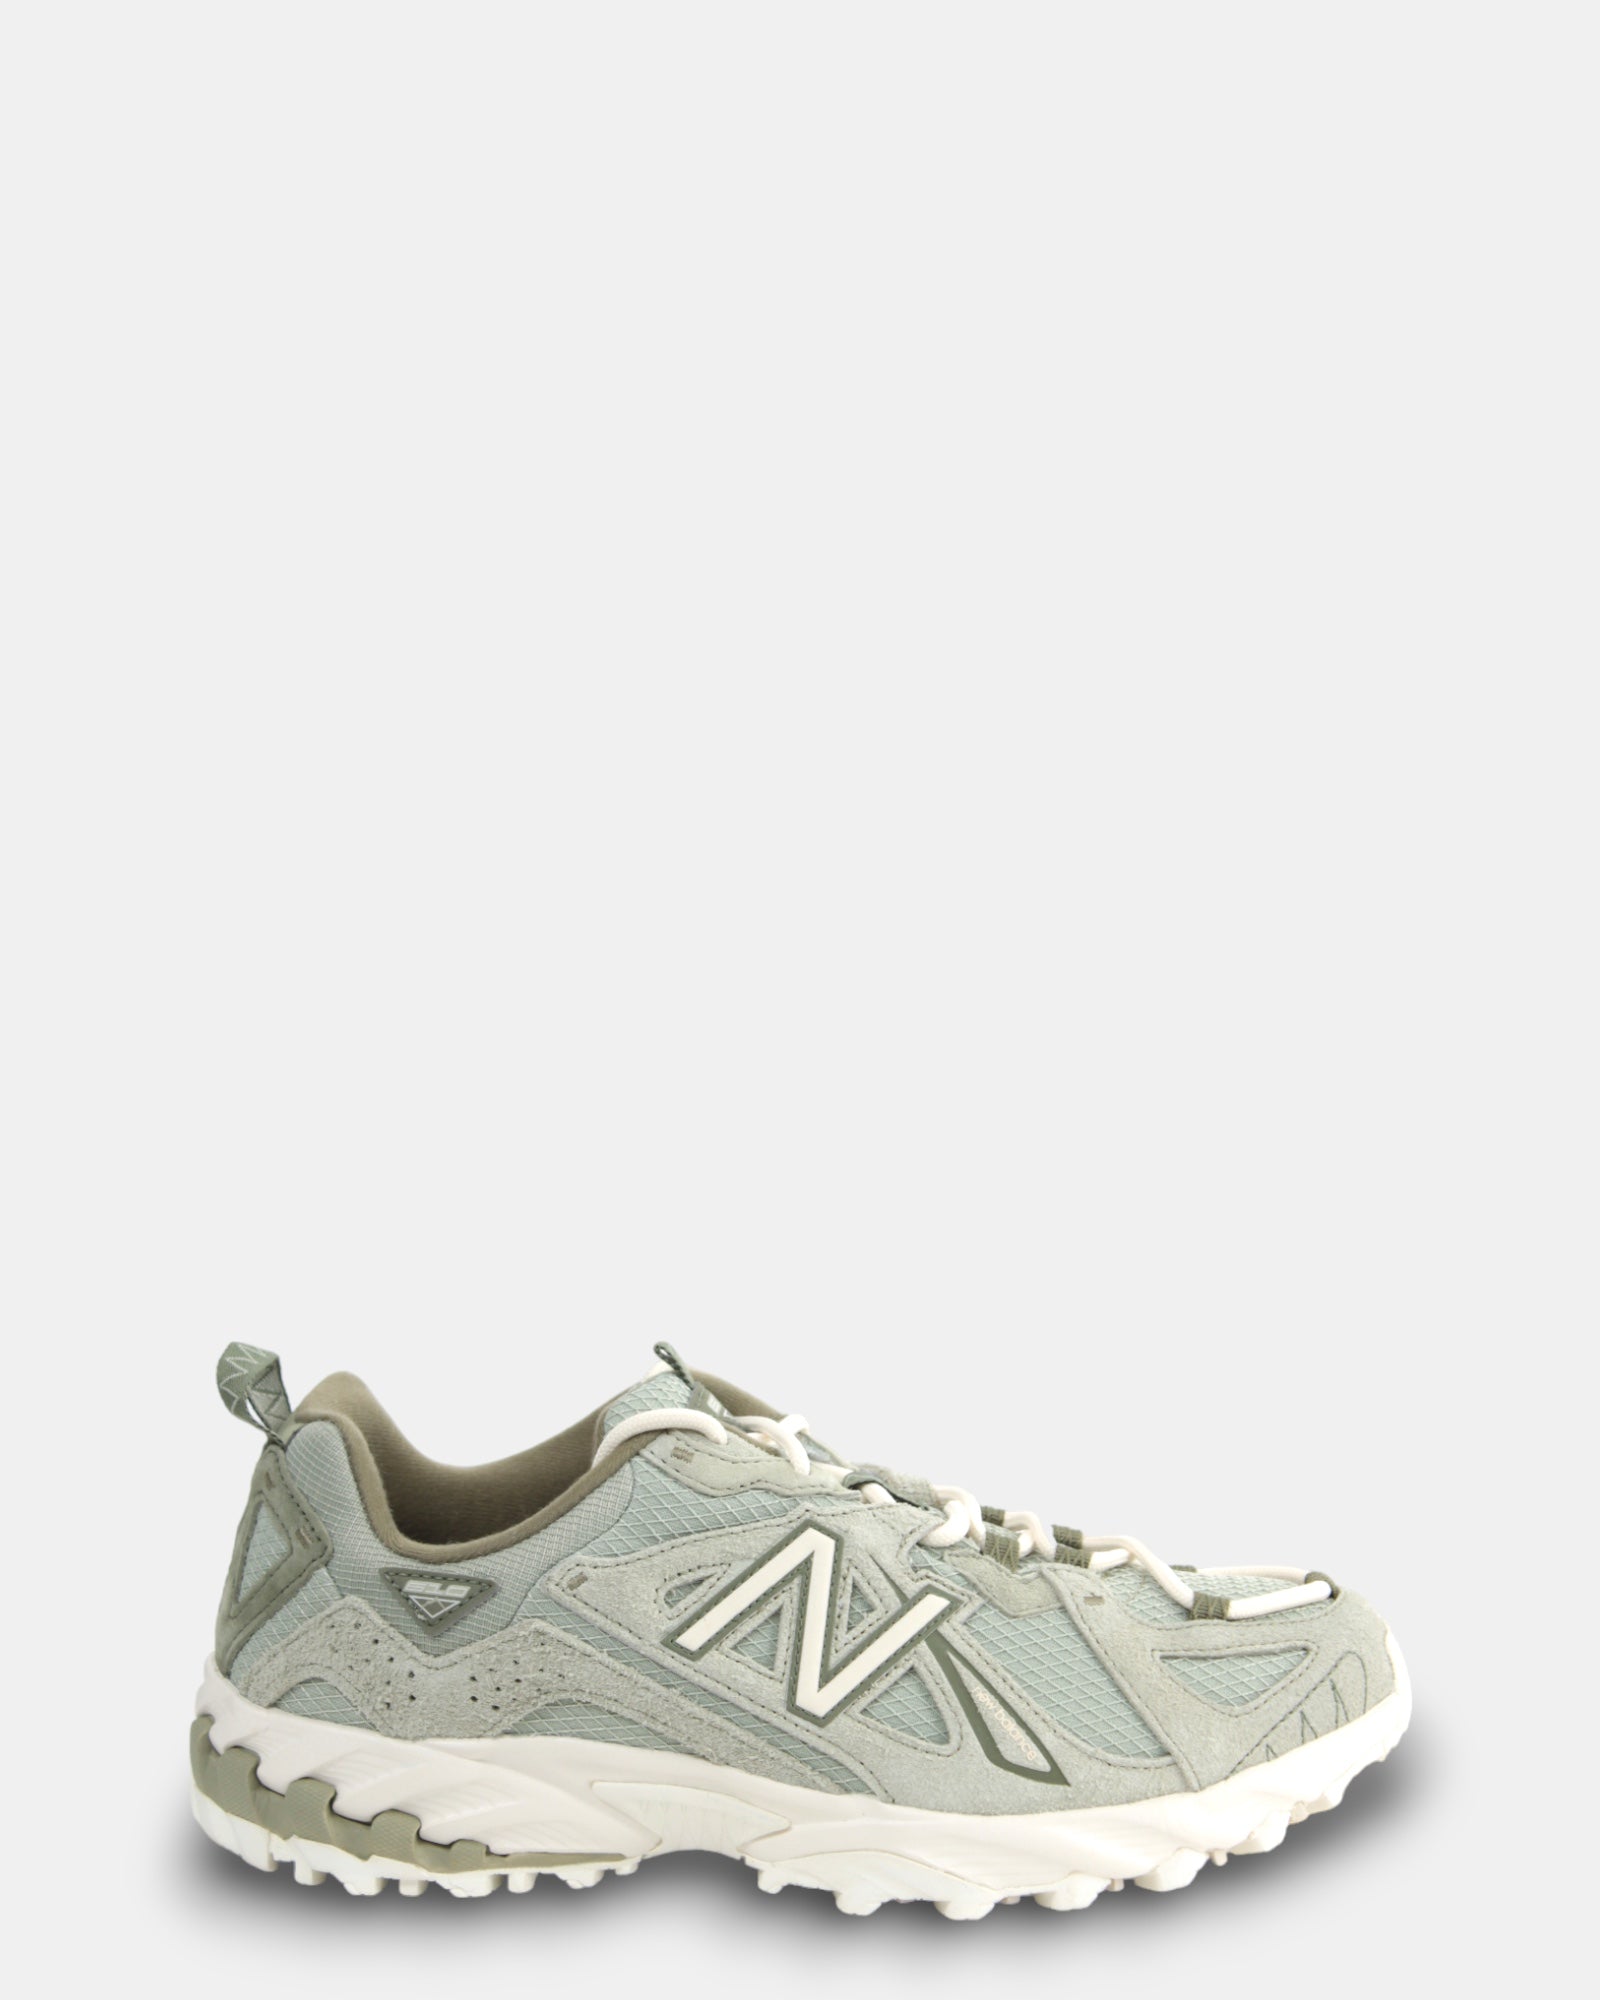 SNEAKERS Olive New Balance